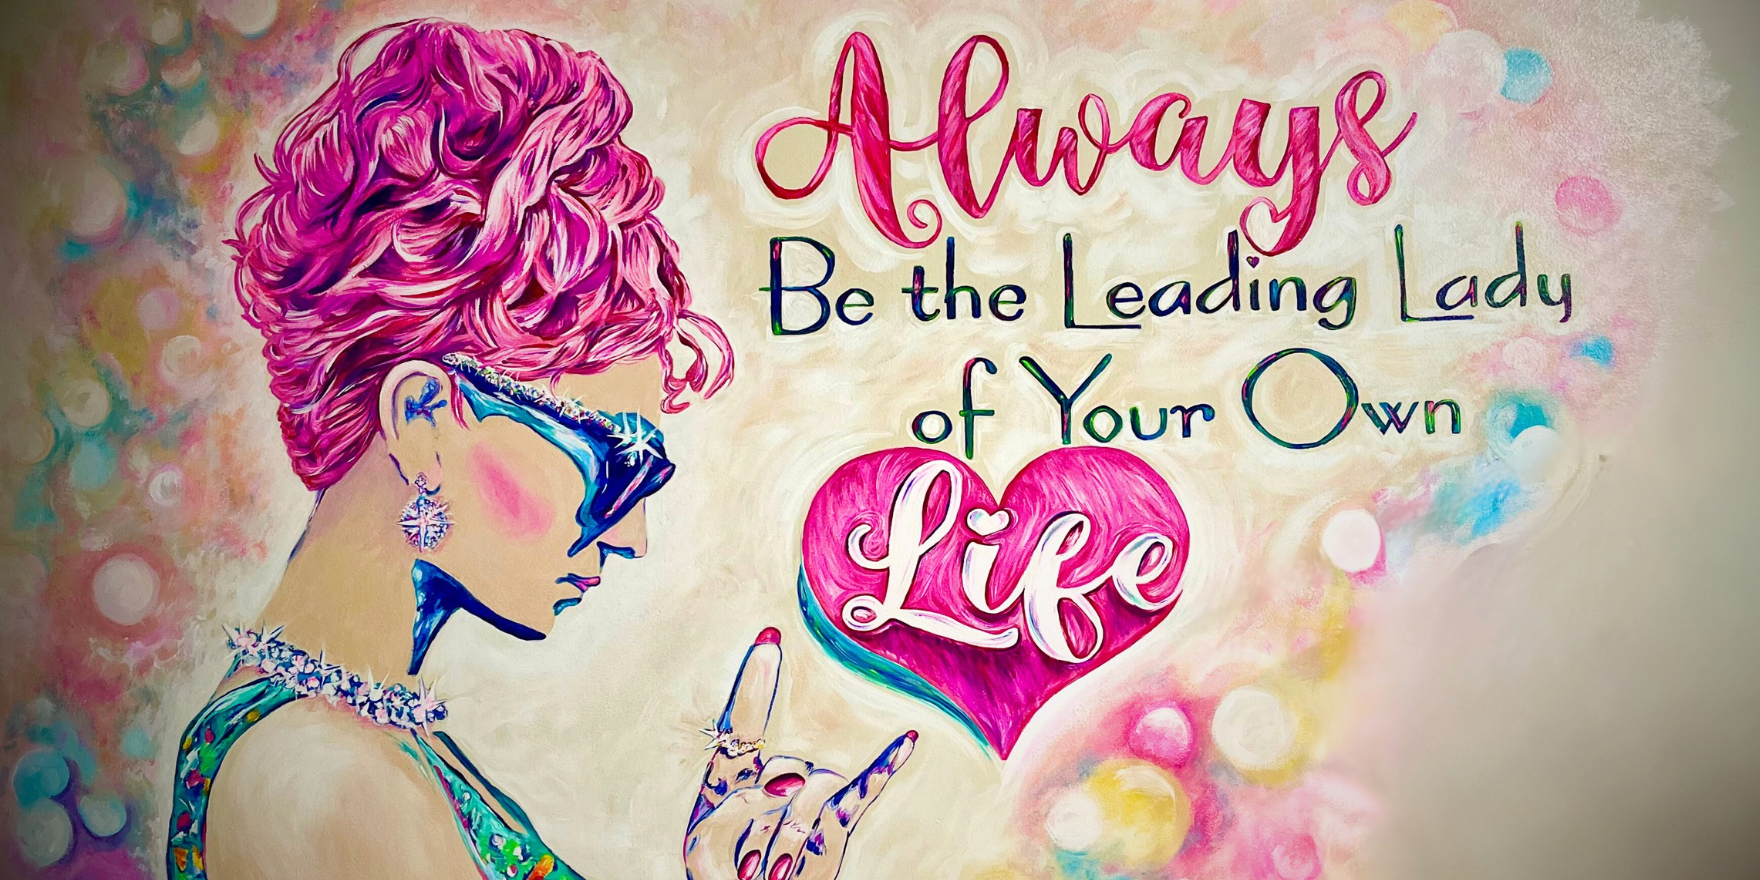 Always be the leading lady of your own life